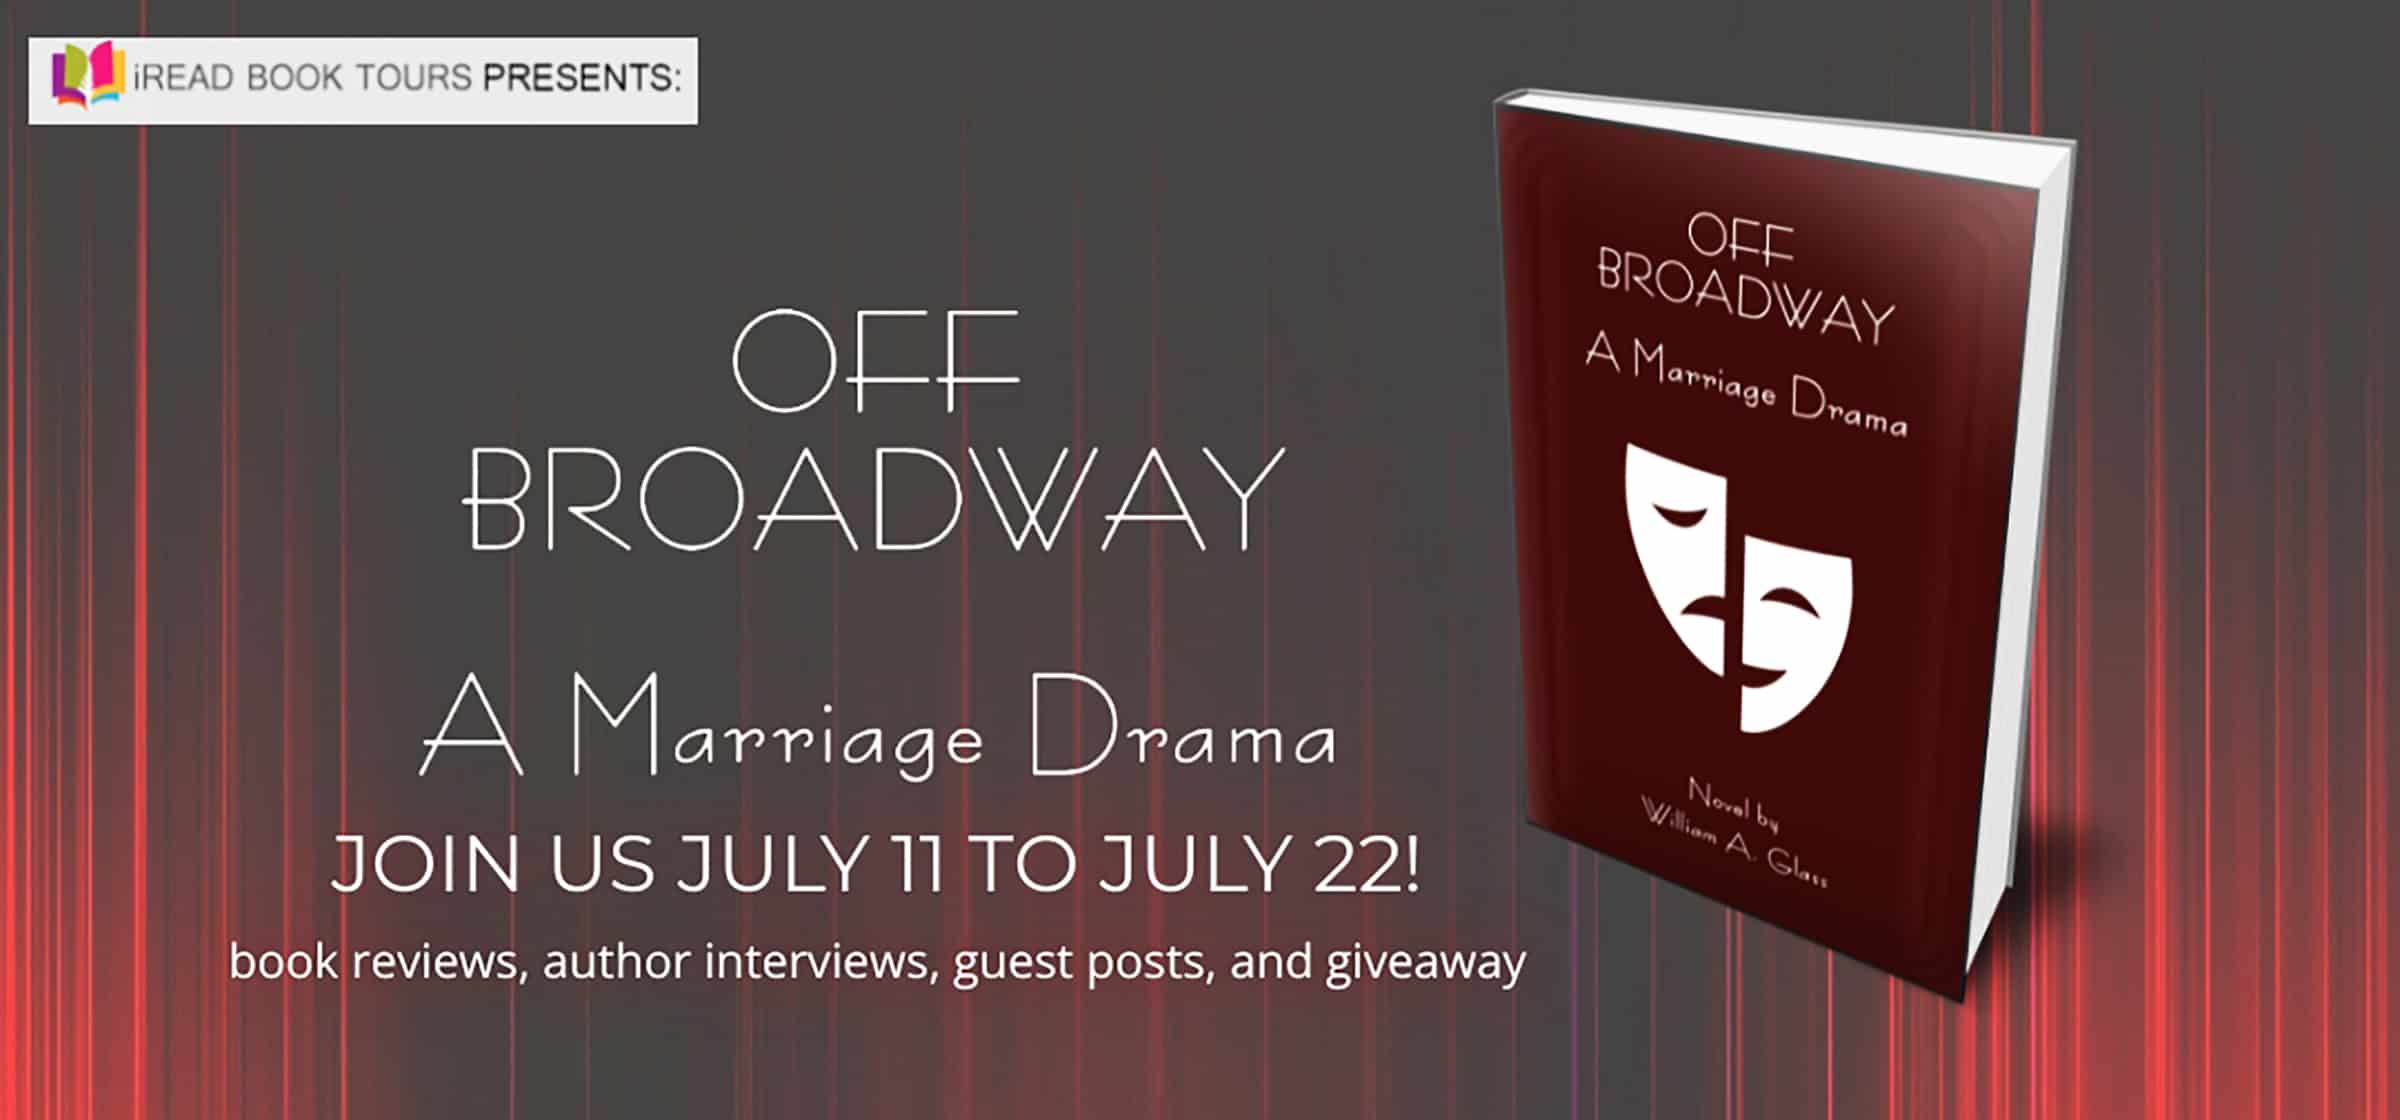 Off Broadway: A Marriage Drama by William A. Glass | 1 Giveaway, Book Review, & Guest Post